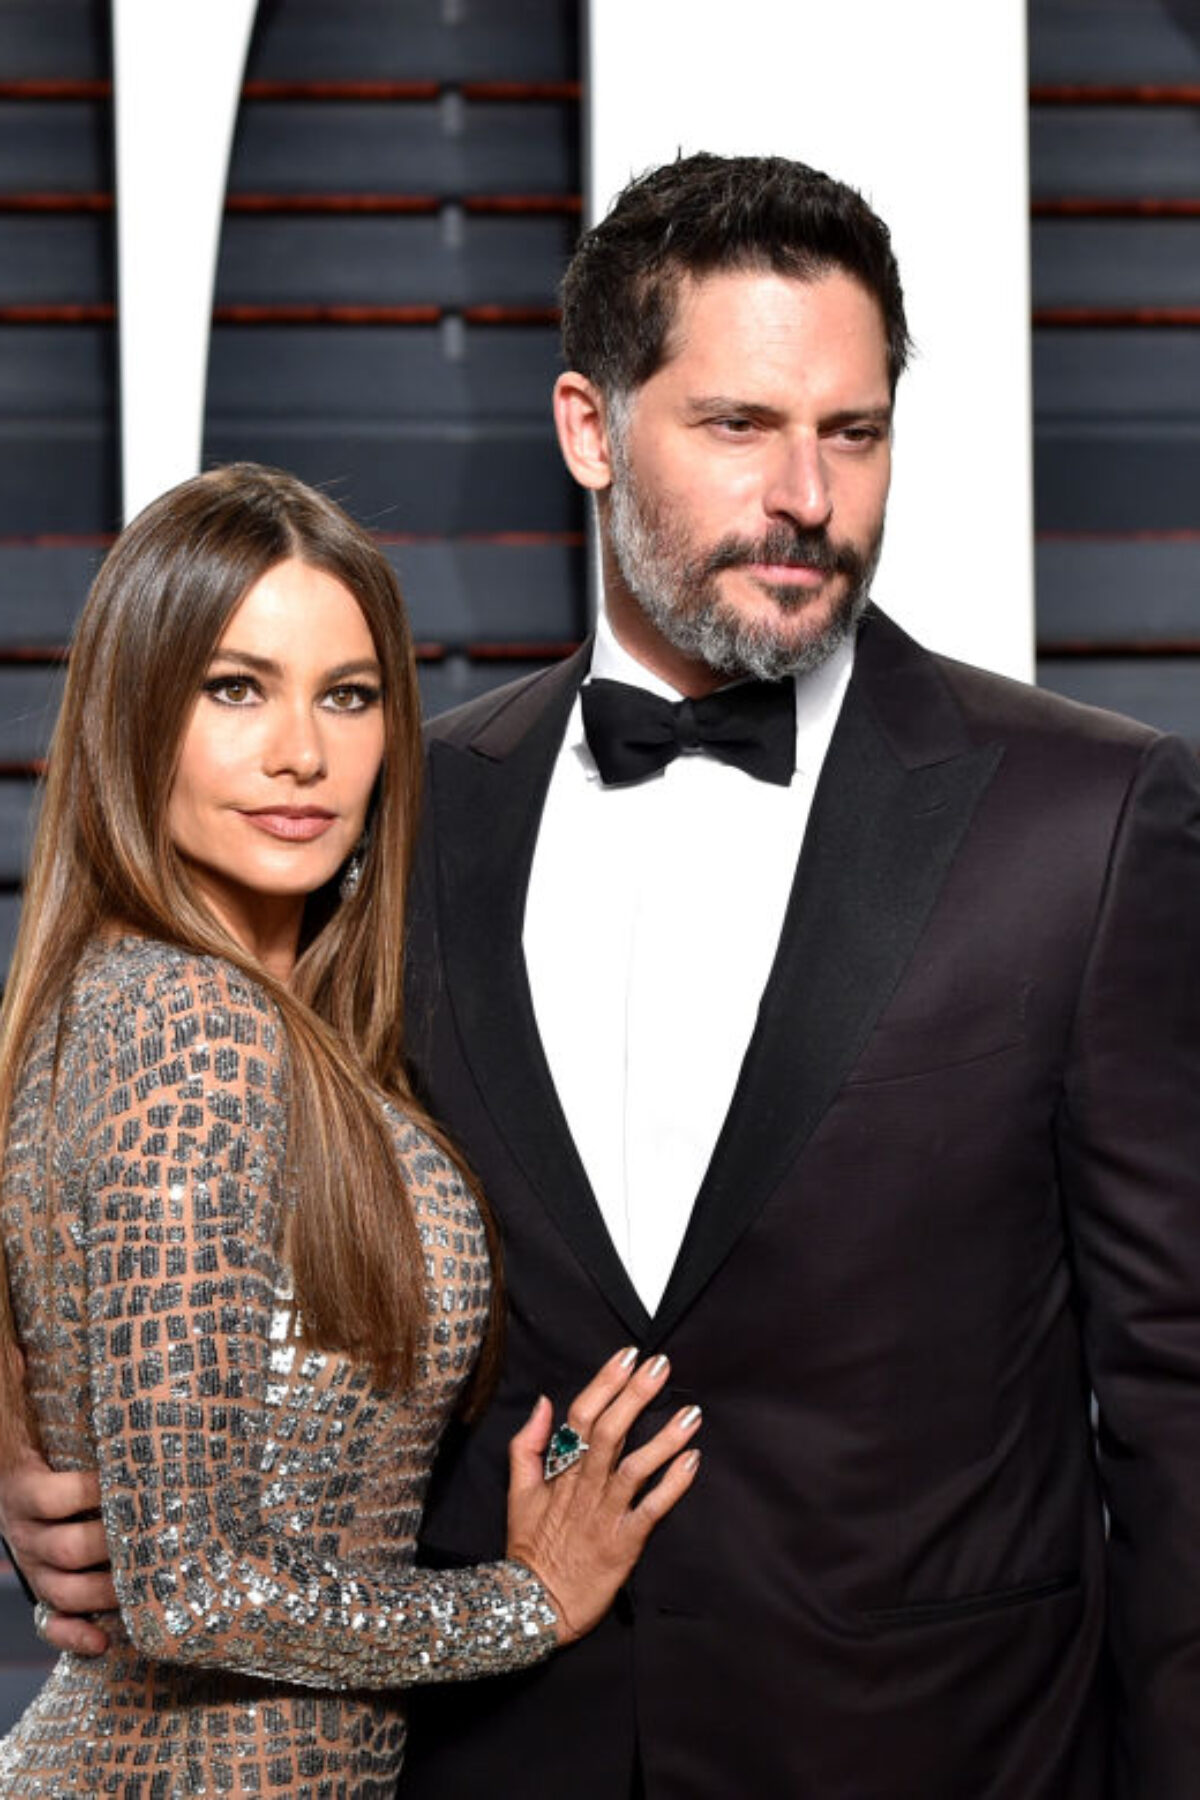 BEVERLY HILLS, CA - FEBRUARY 26: Actress Sofia Vergara (L) and actor Joe Manganiello attend the 2017 Vanity Fair Oscar Party hosted by Graydon Carter at Wallis Annenberg Center for the Performing Arts on February 26, 2017 in Beverly Hills, California. (Photo by John Shearer/Getty Images)